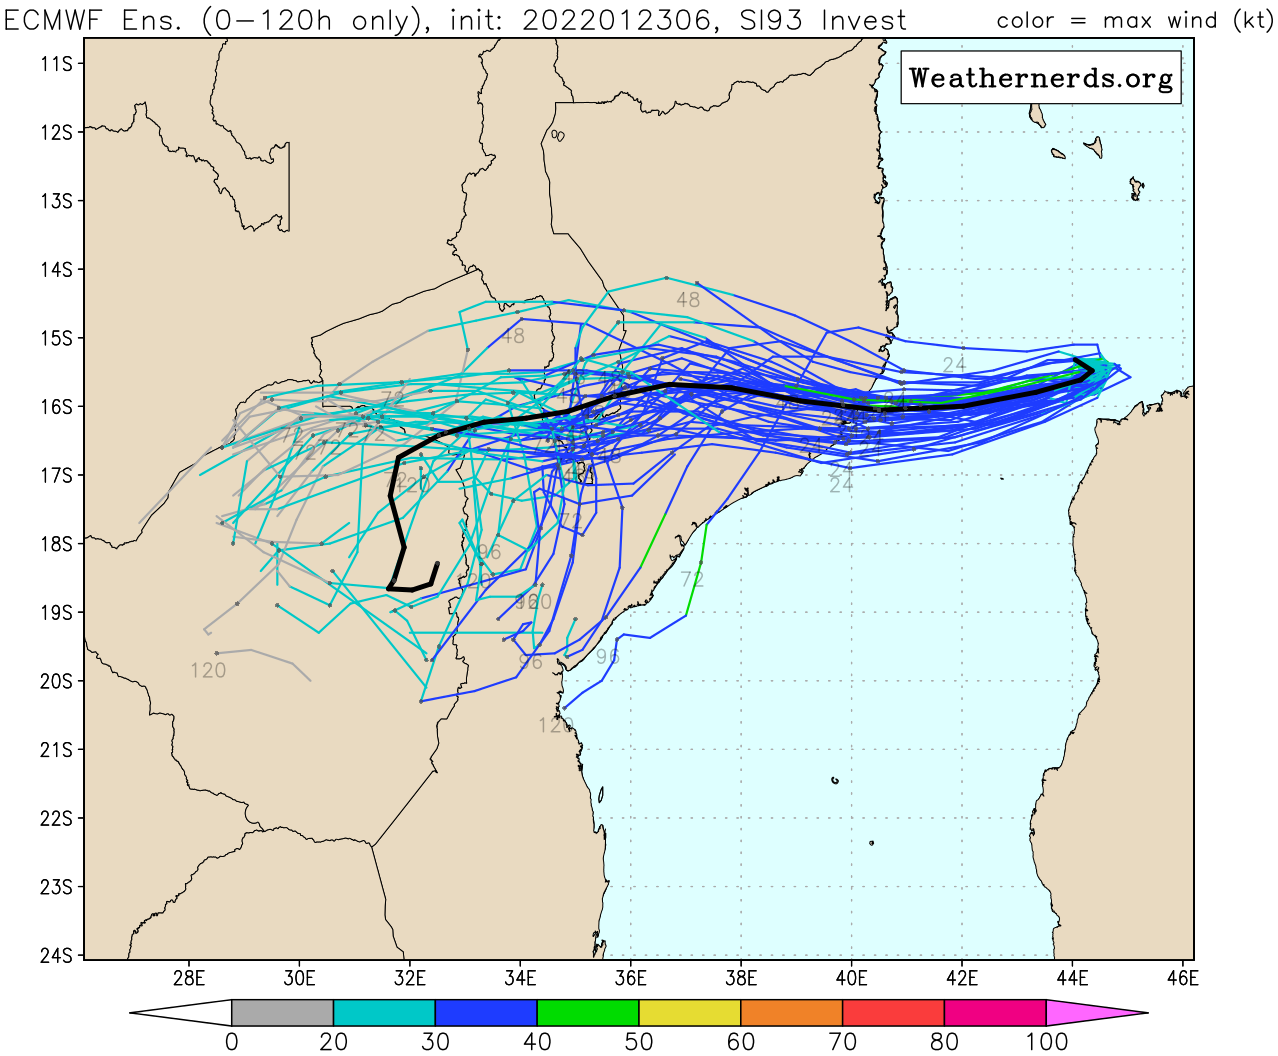 TC 07S is intensifying over the MOZ Channel while approaching Mozambique coastline// Invest 96S on the map, 23/15utc